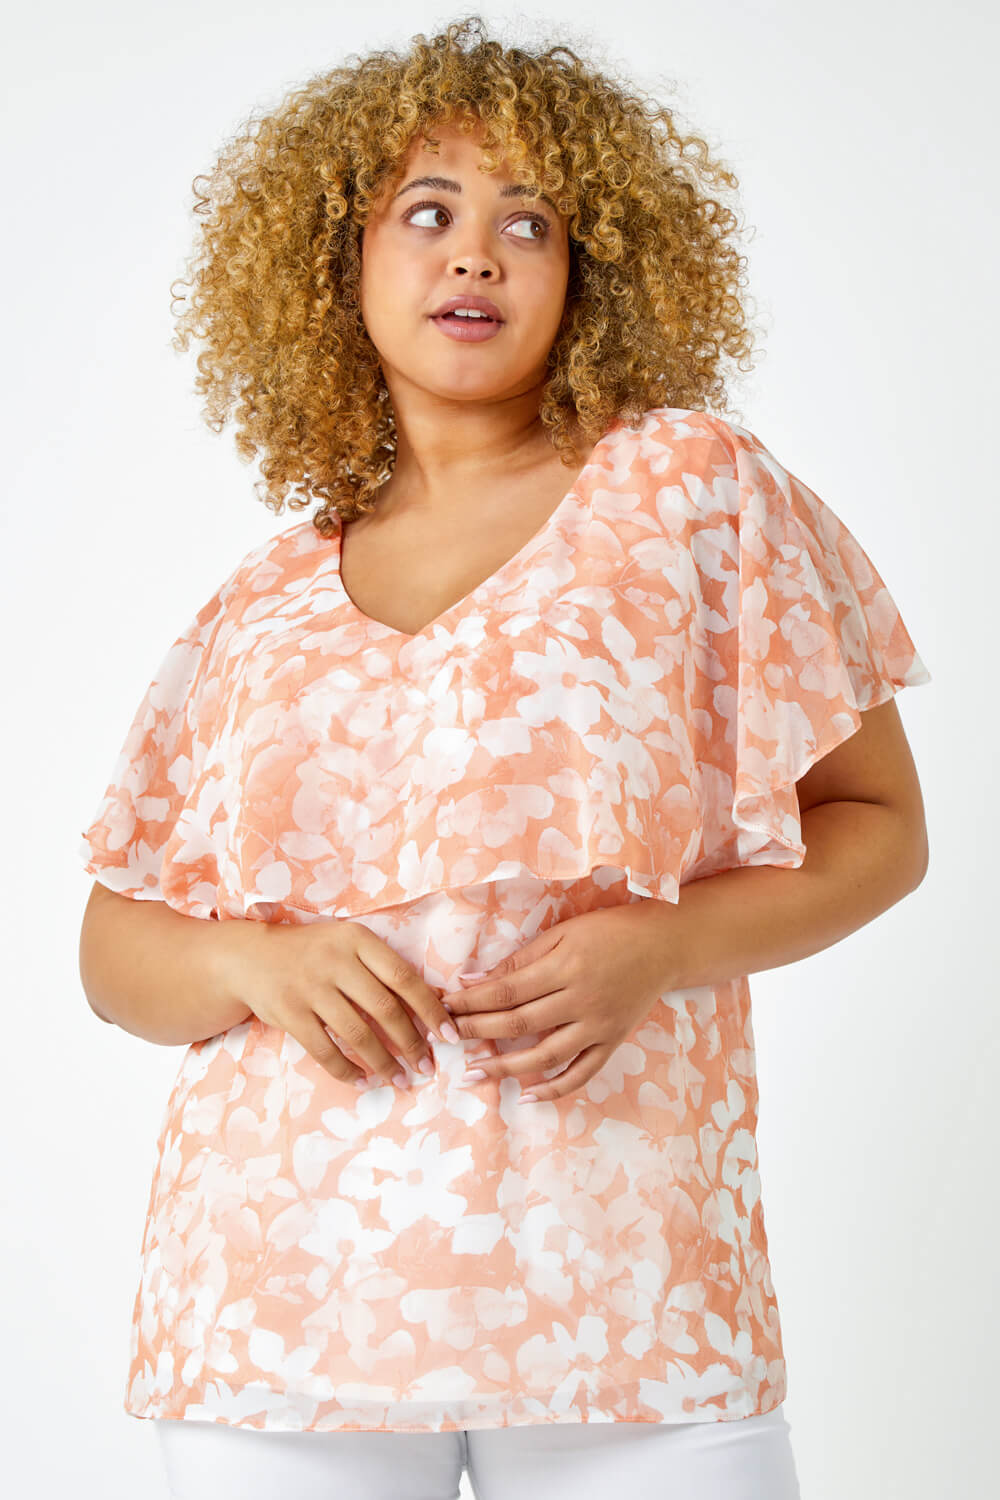 CORAL Curve Floral Chiffon Overlay Top, Image 4 of 5